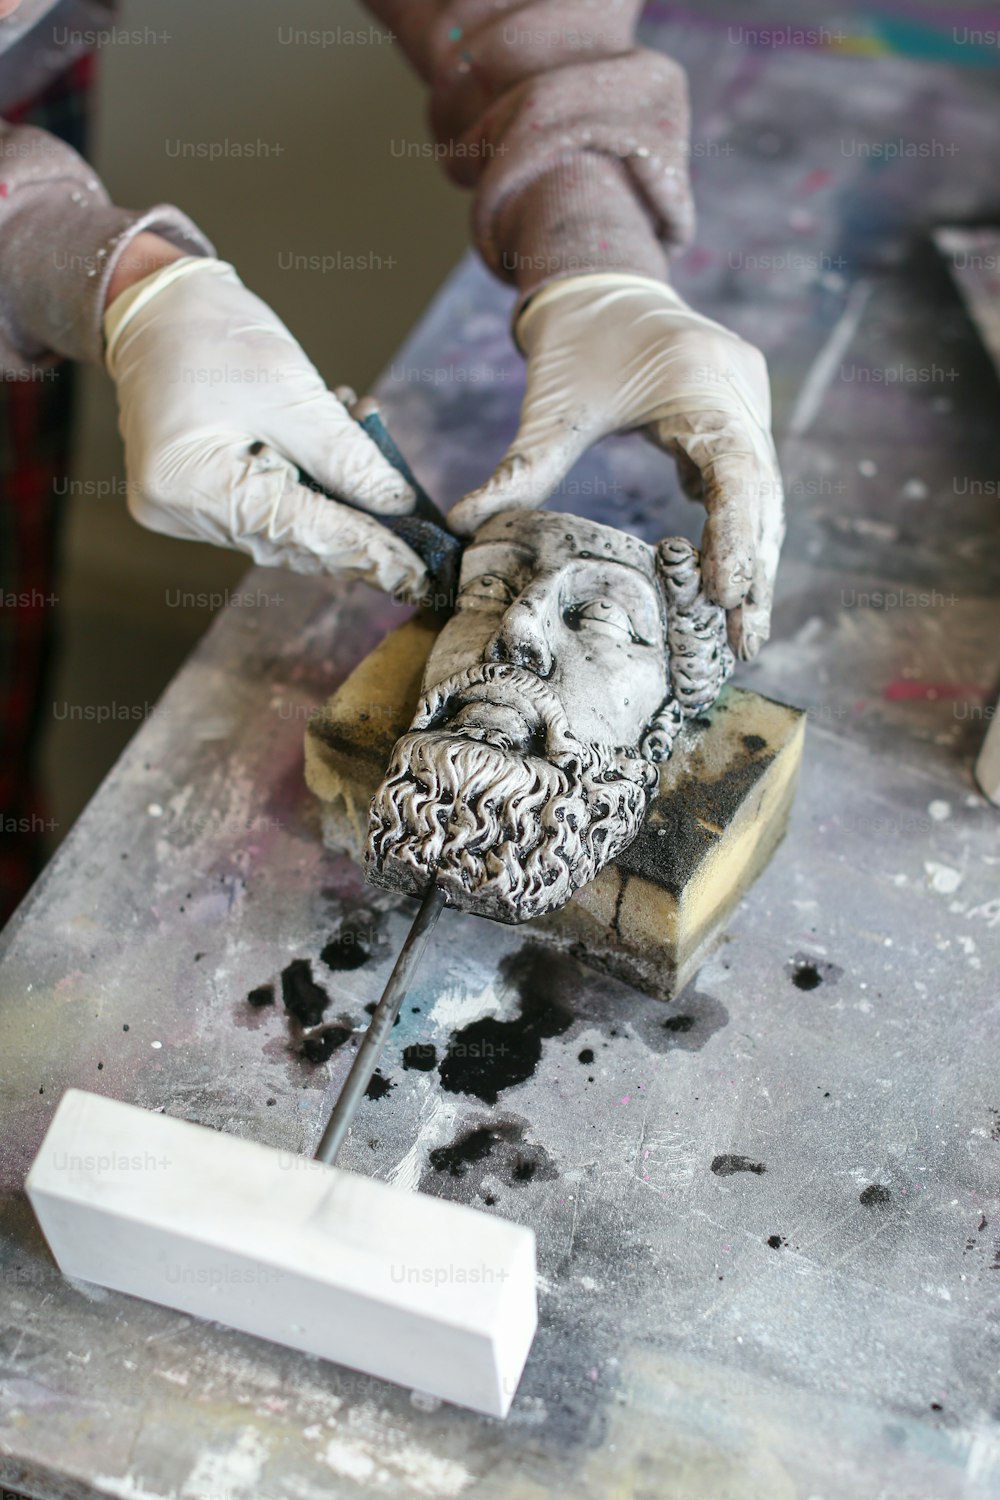 a person is carving a statue of a man's head